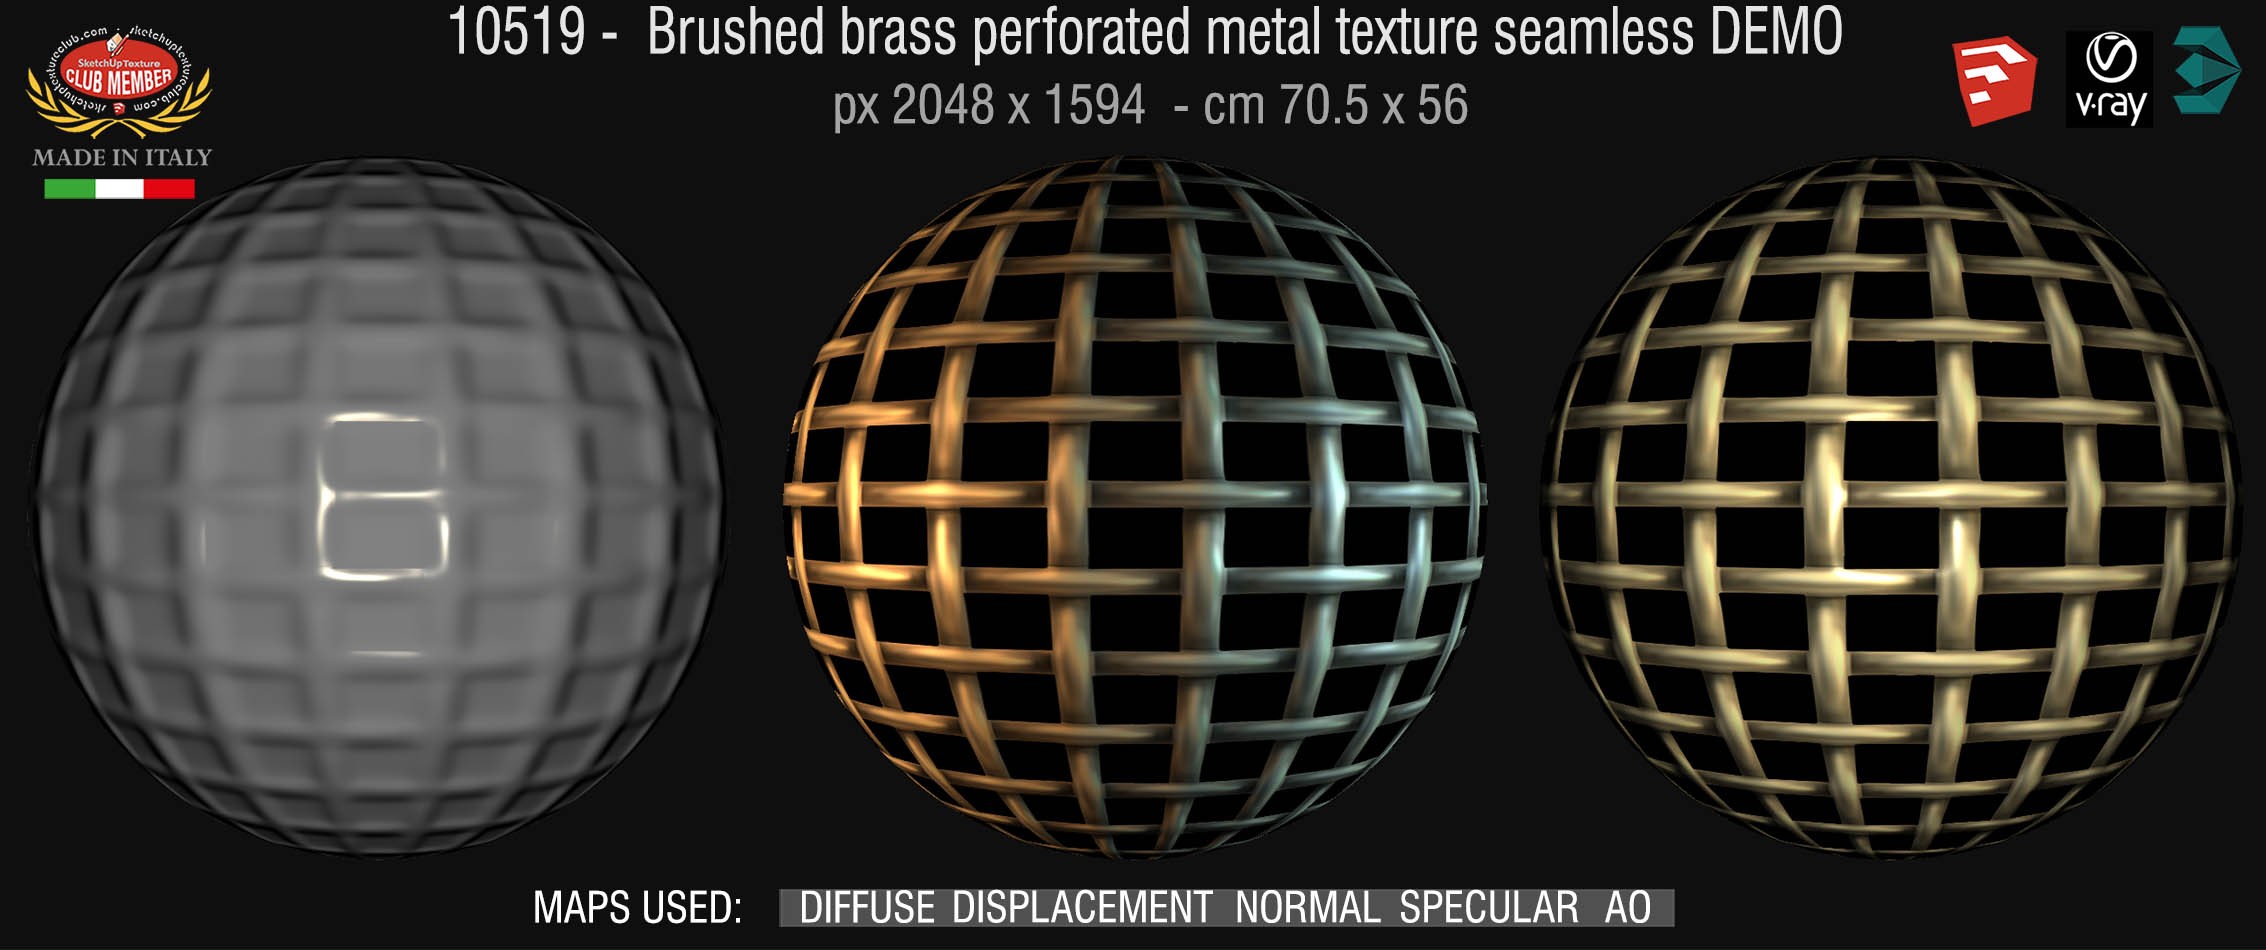 10519 HR Brushed brass perforated metal texture seamless + maps DEMO